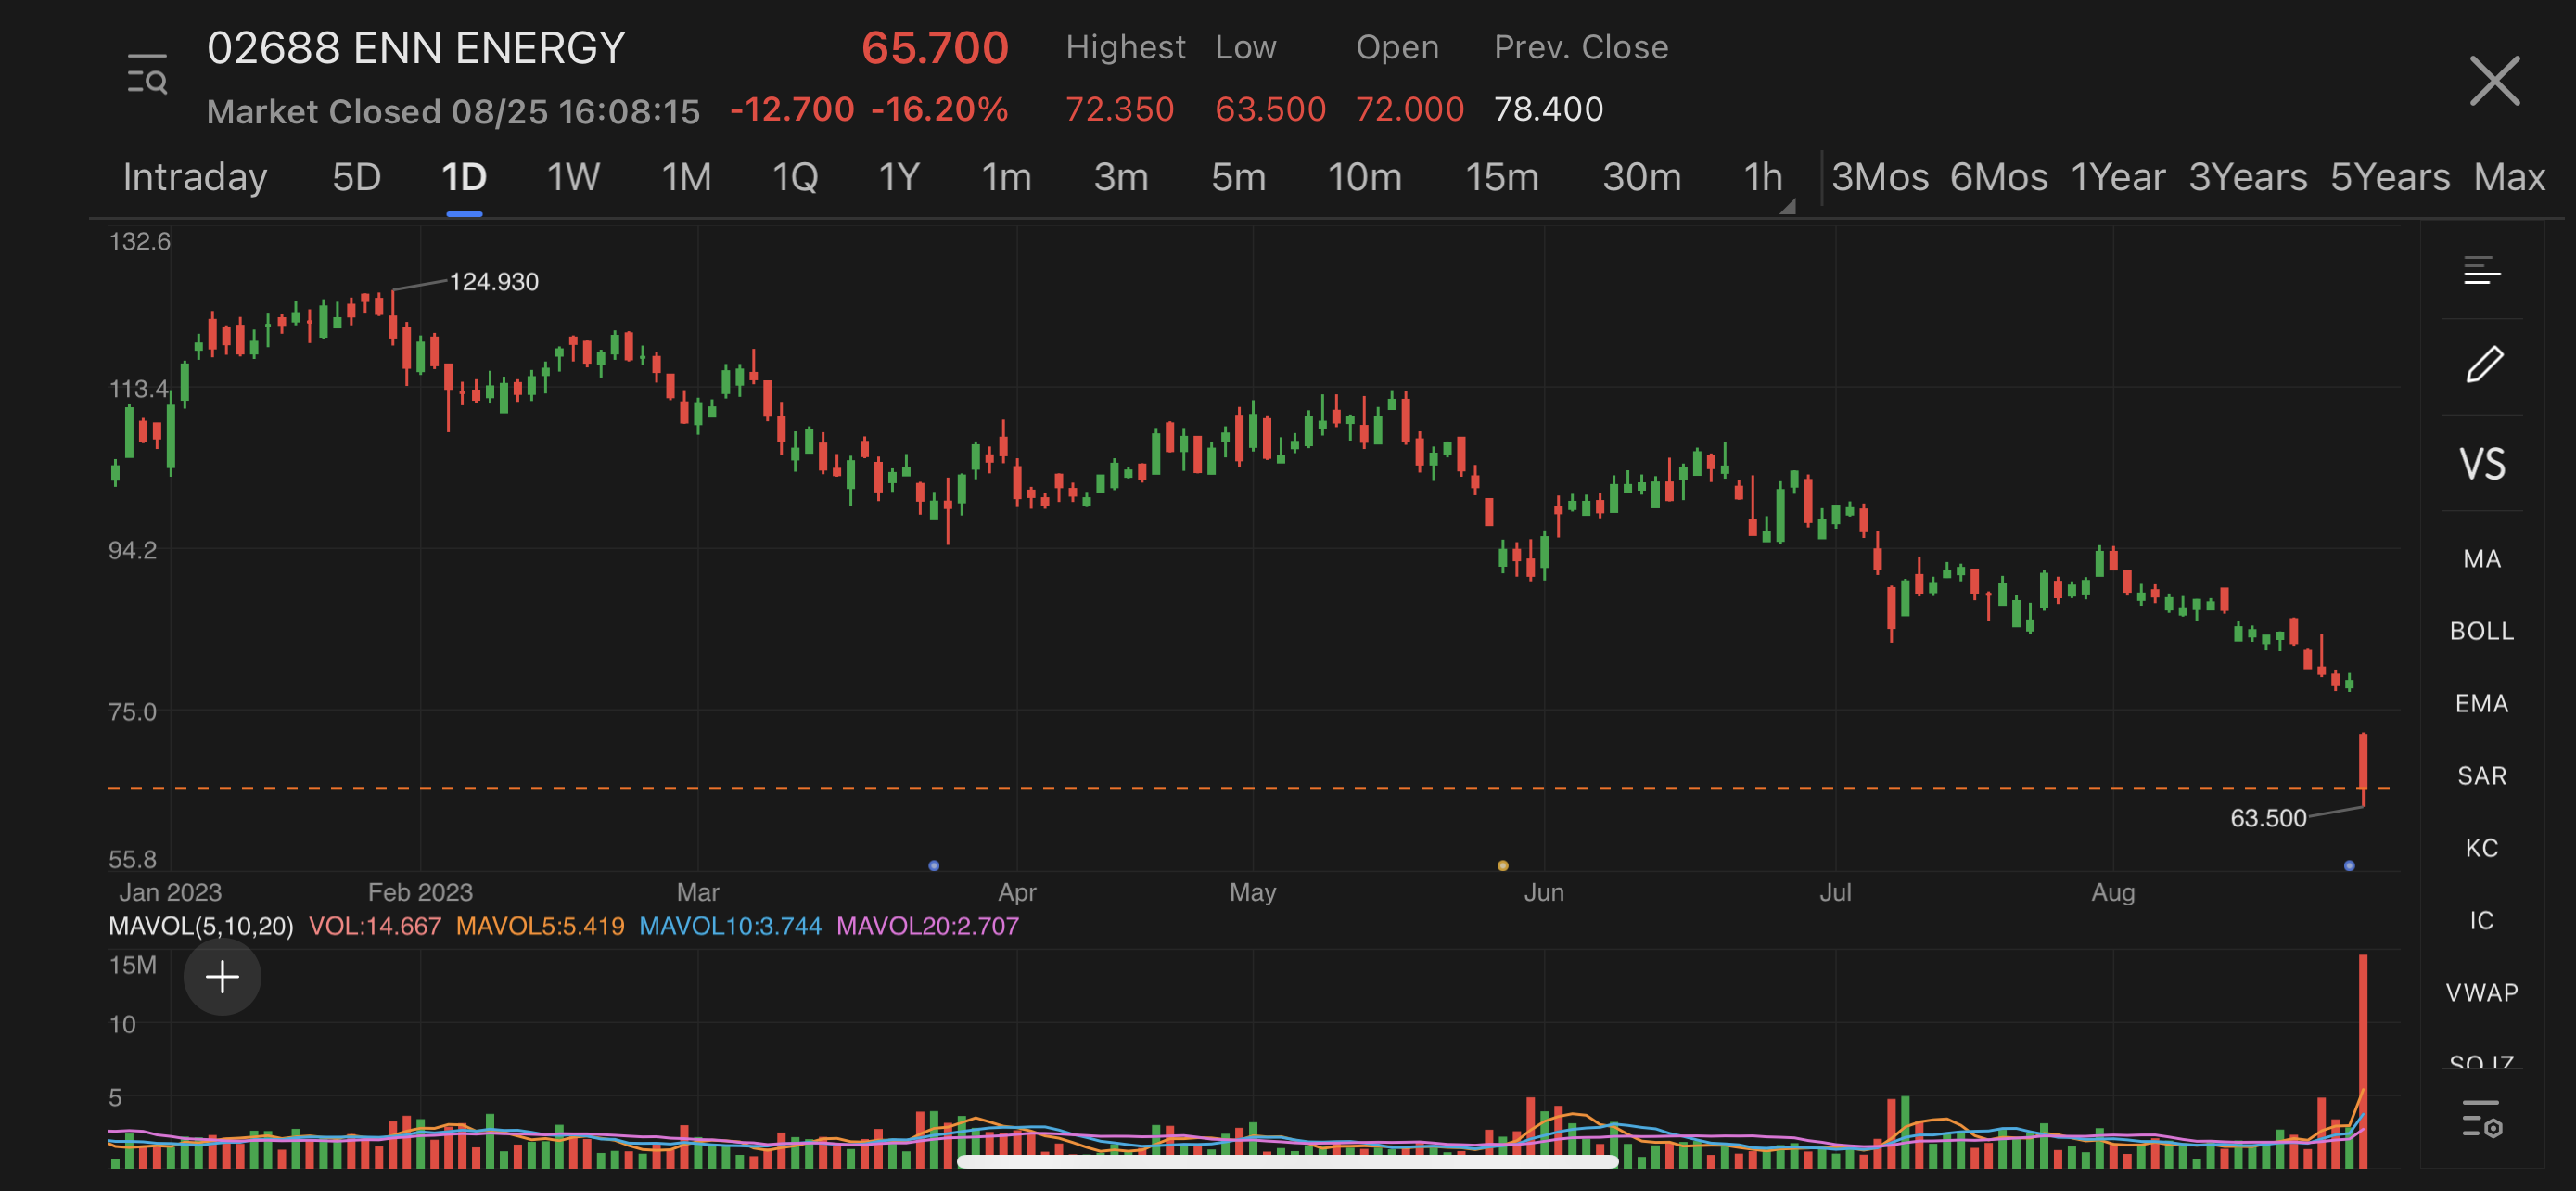 ENN Energy tumbled over 16% in Hong Kong after report declines in H1 revenue amid weak demand